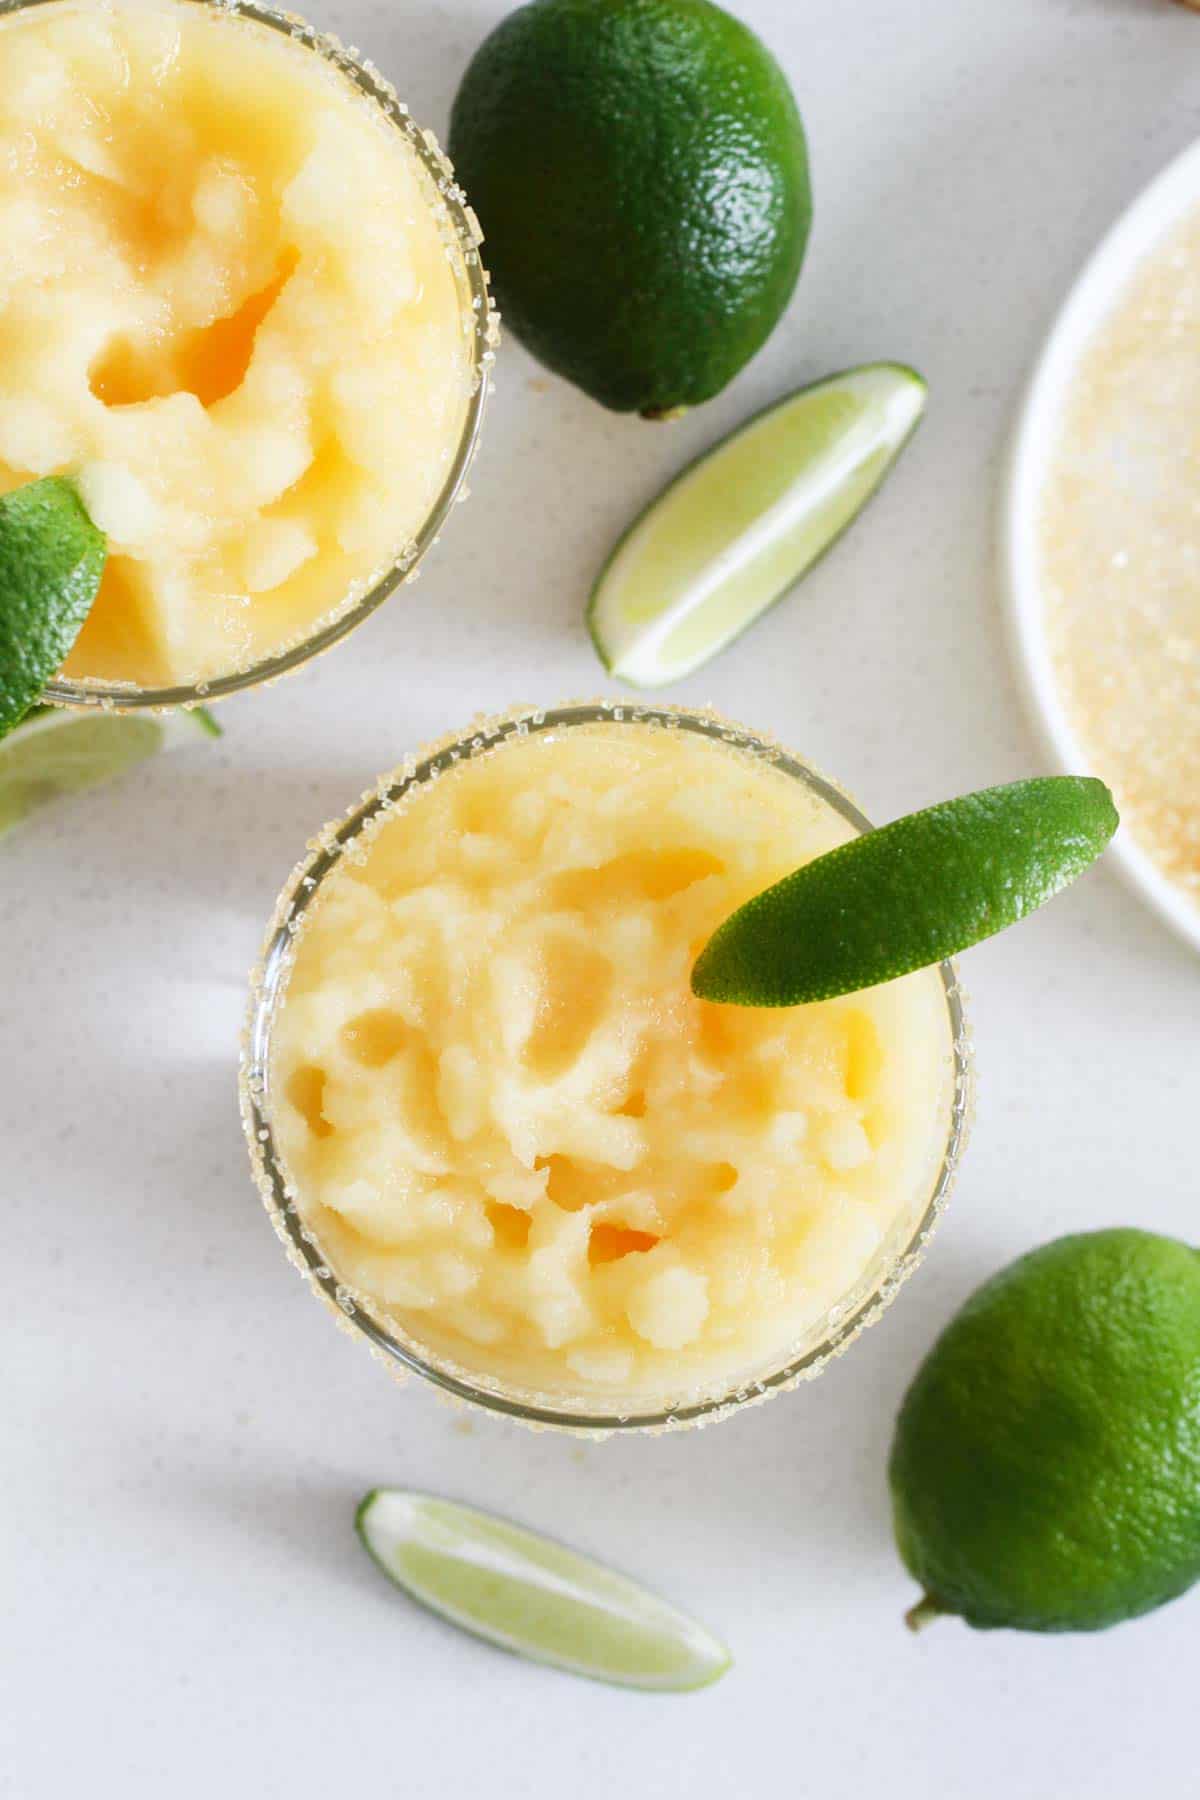 virgin margaritas - family friendly drinks topped with fresh limes